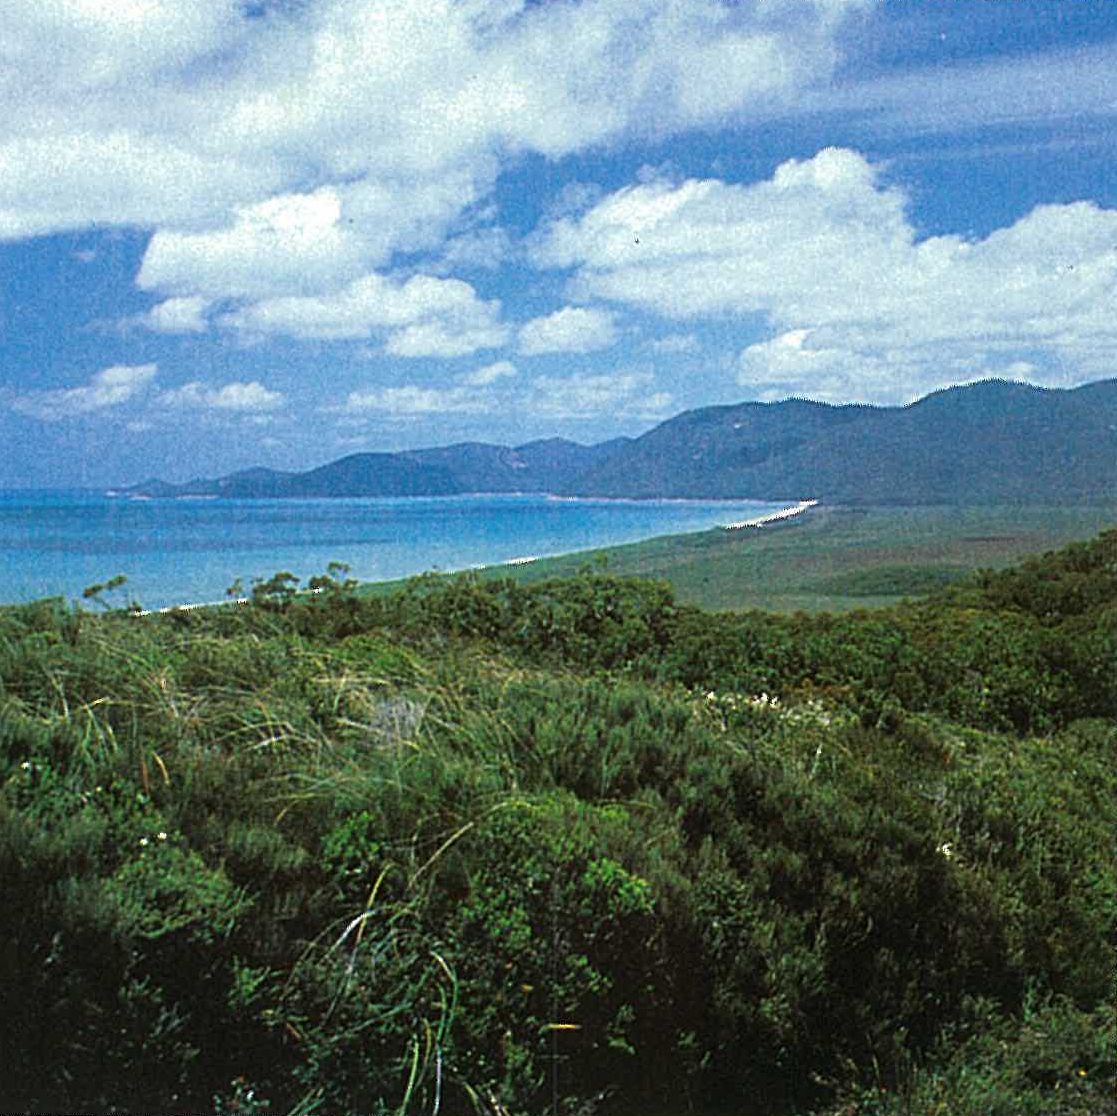 Wilsons Promontory; heathland. Allocasuarina paludosa, Banksia marginata, Lepidospermum laterale and Leptospermum continentale, with thickets of low Eucalyptus baxteri. North-east coast, Five-mile Beach in background.